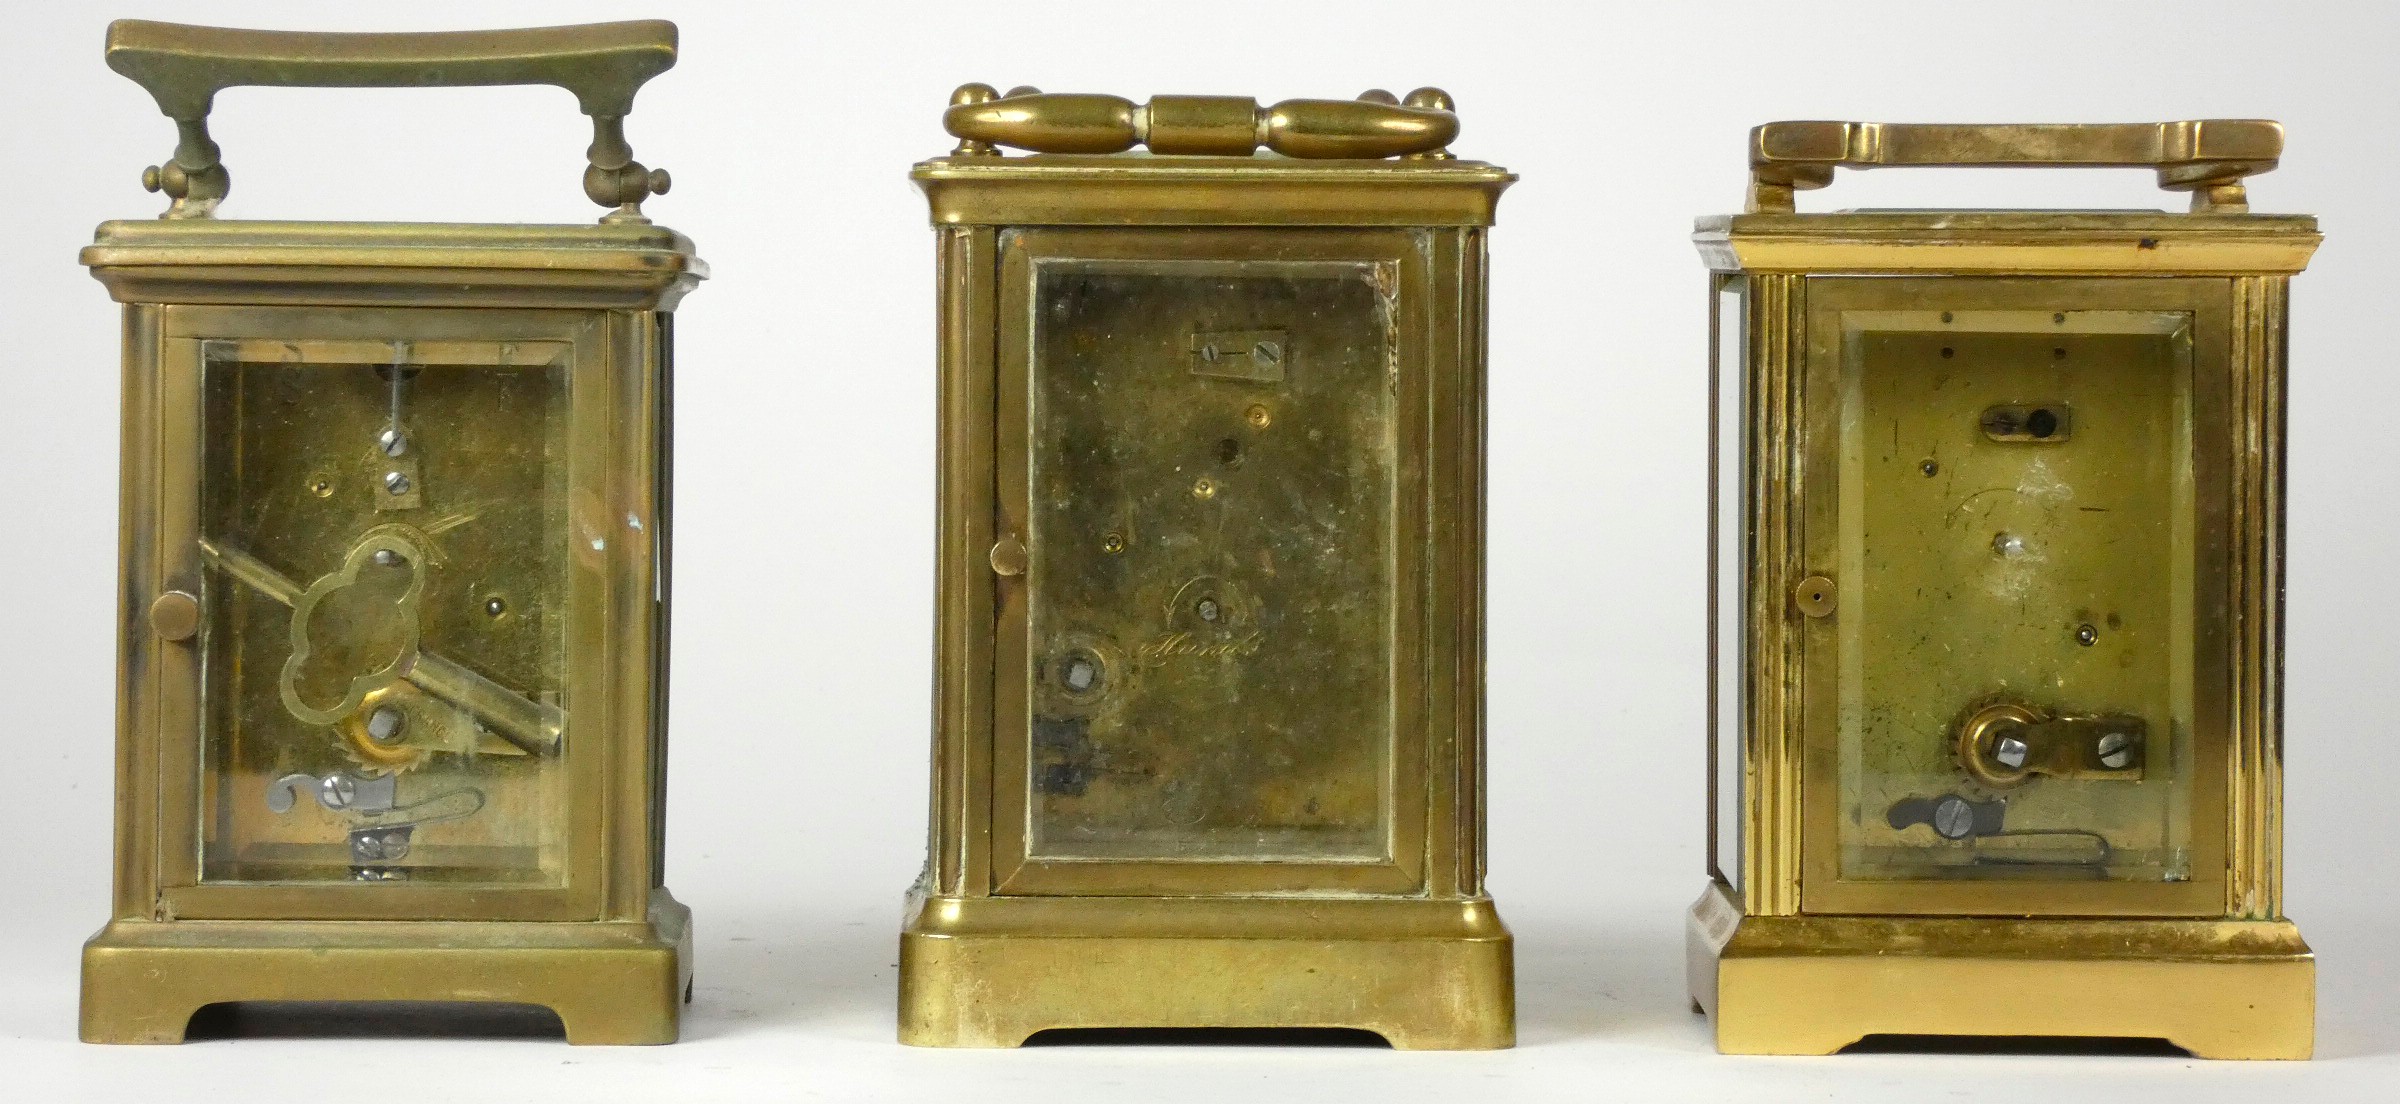 Three mid 20th Century carriage clocks, having 8 day movements, brass cased, enameled dials with - Image 3 of 3